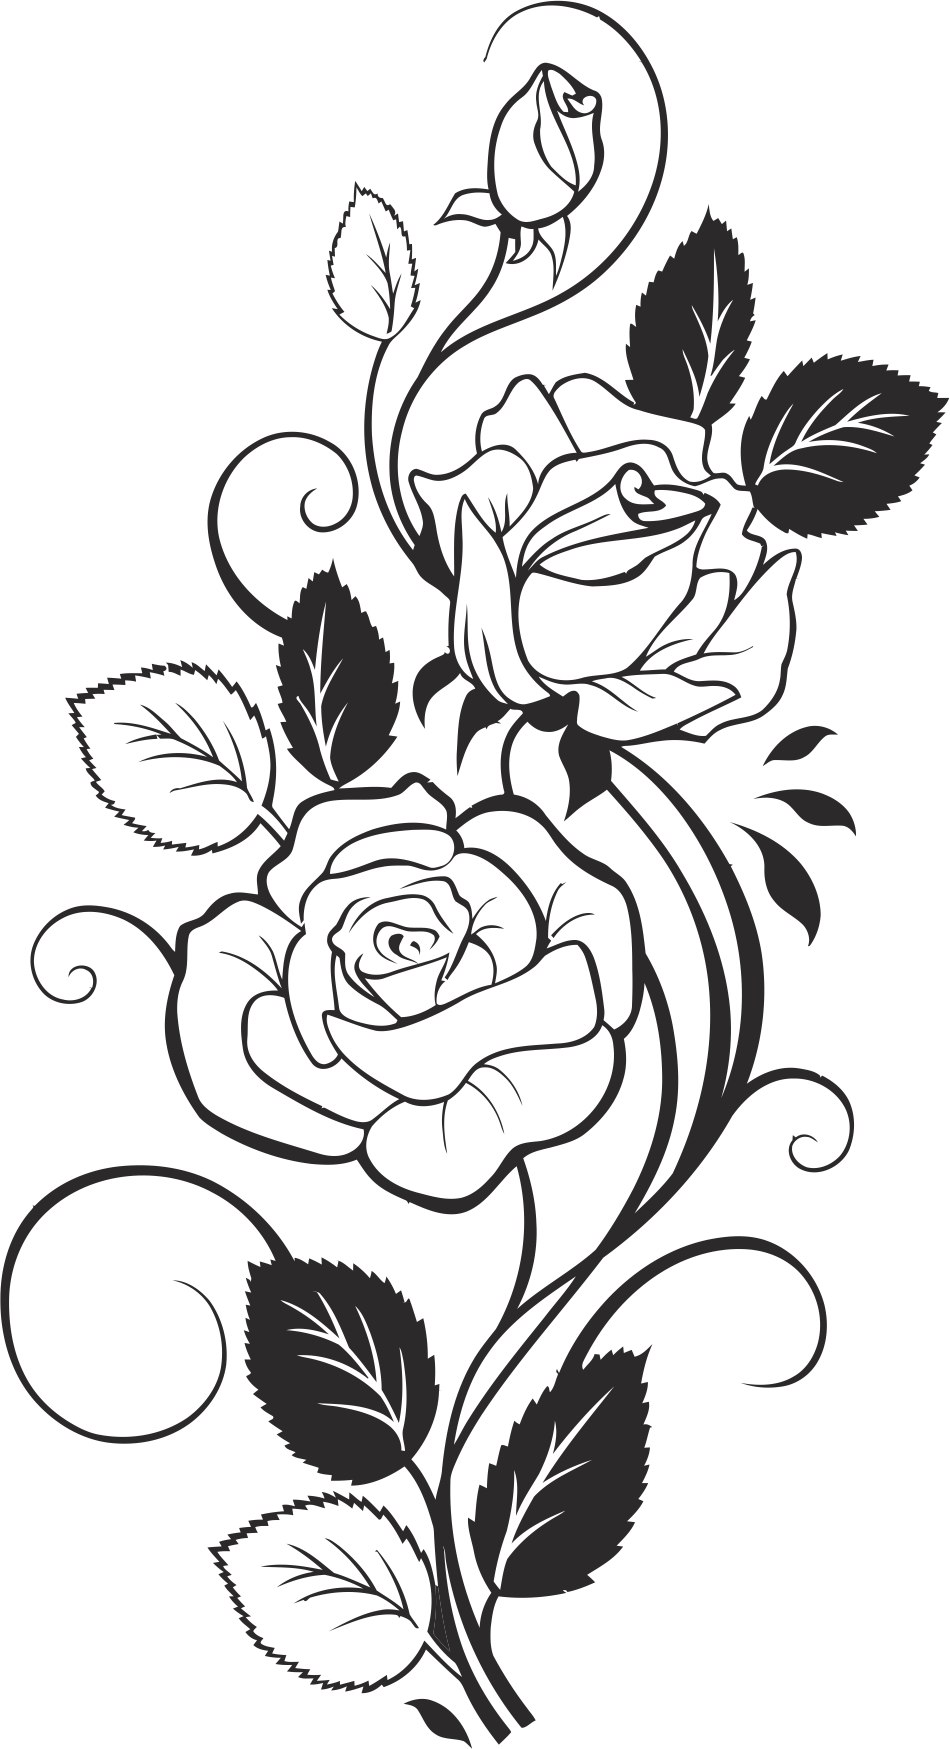 Black and White Rose Vector Free Vector cdr Download - 3axis.co